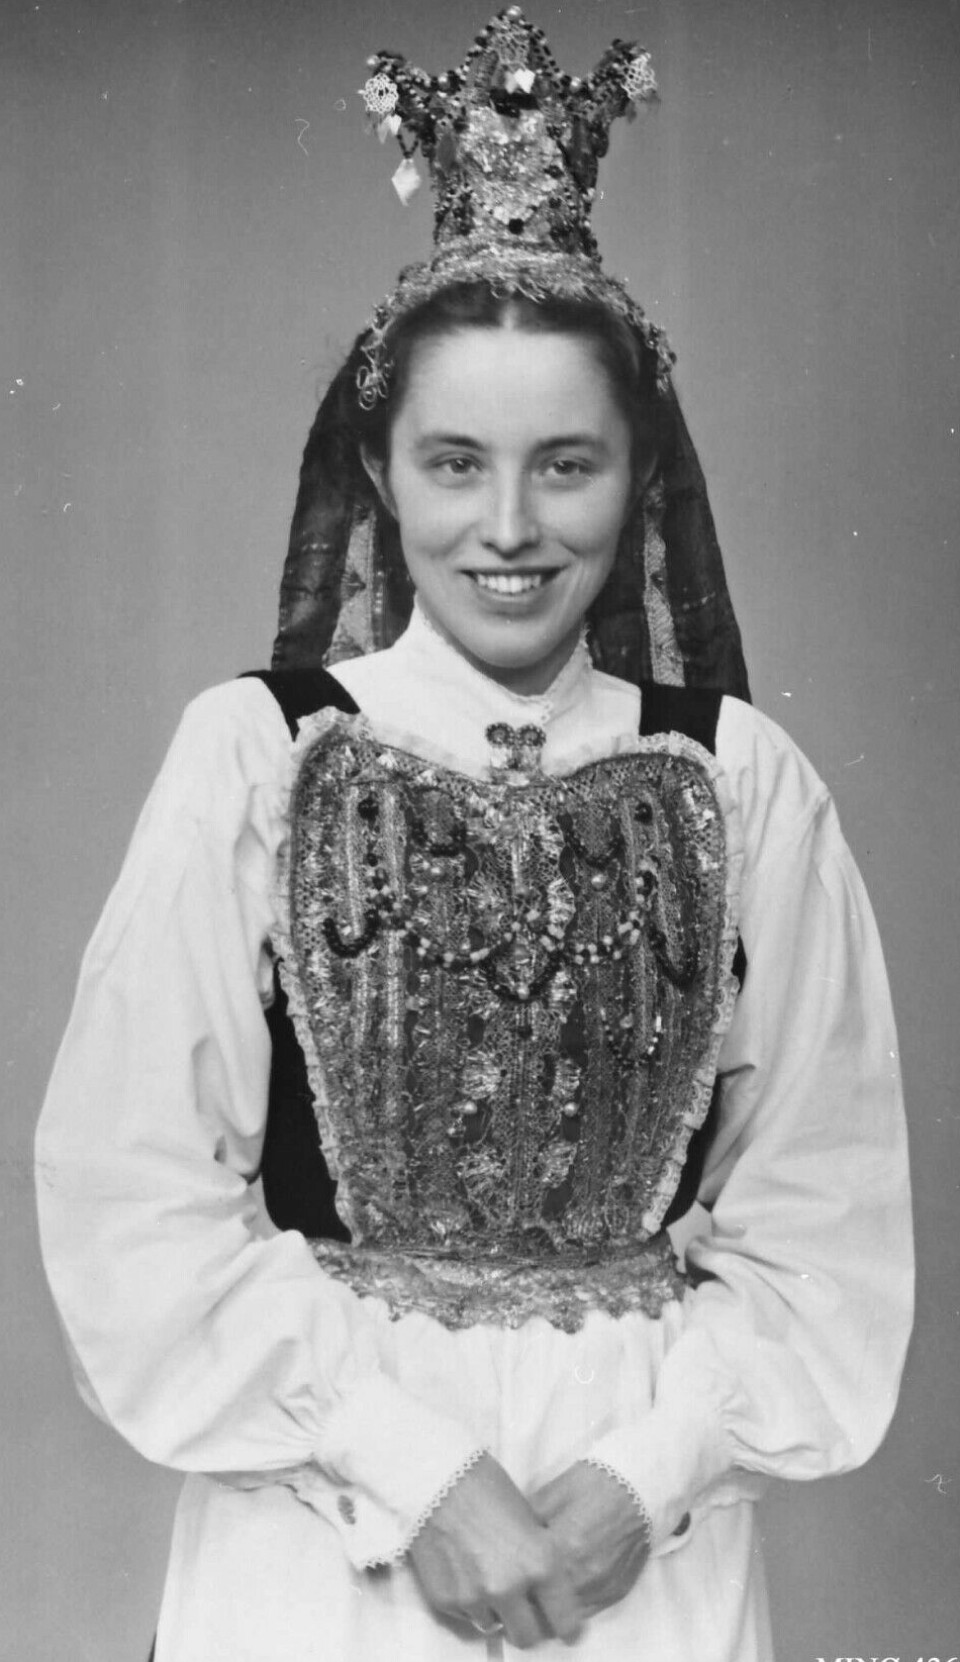 Girl from Alvdal adorned as a bride with a bridal crown in 1930.